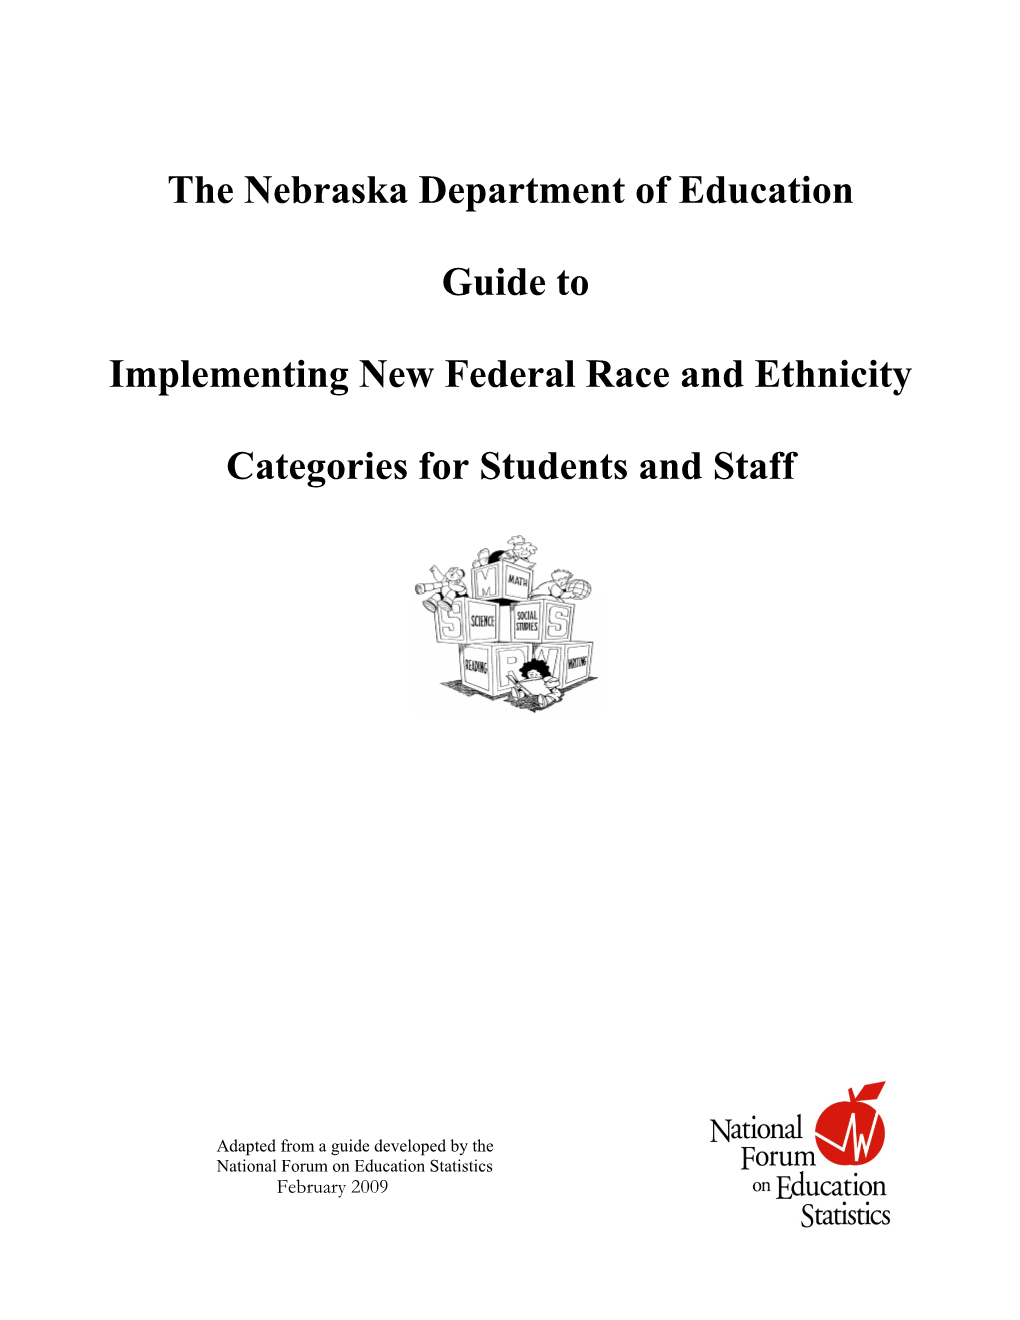 The Nebraska Guide to Implementing New Federal Race and Ethnicity